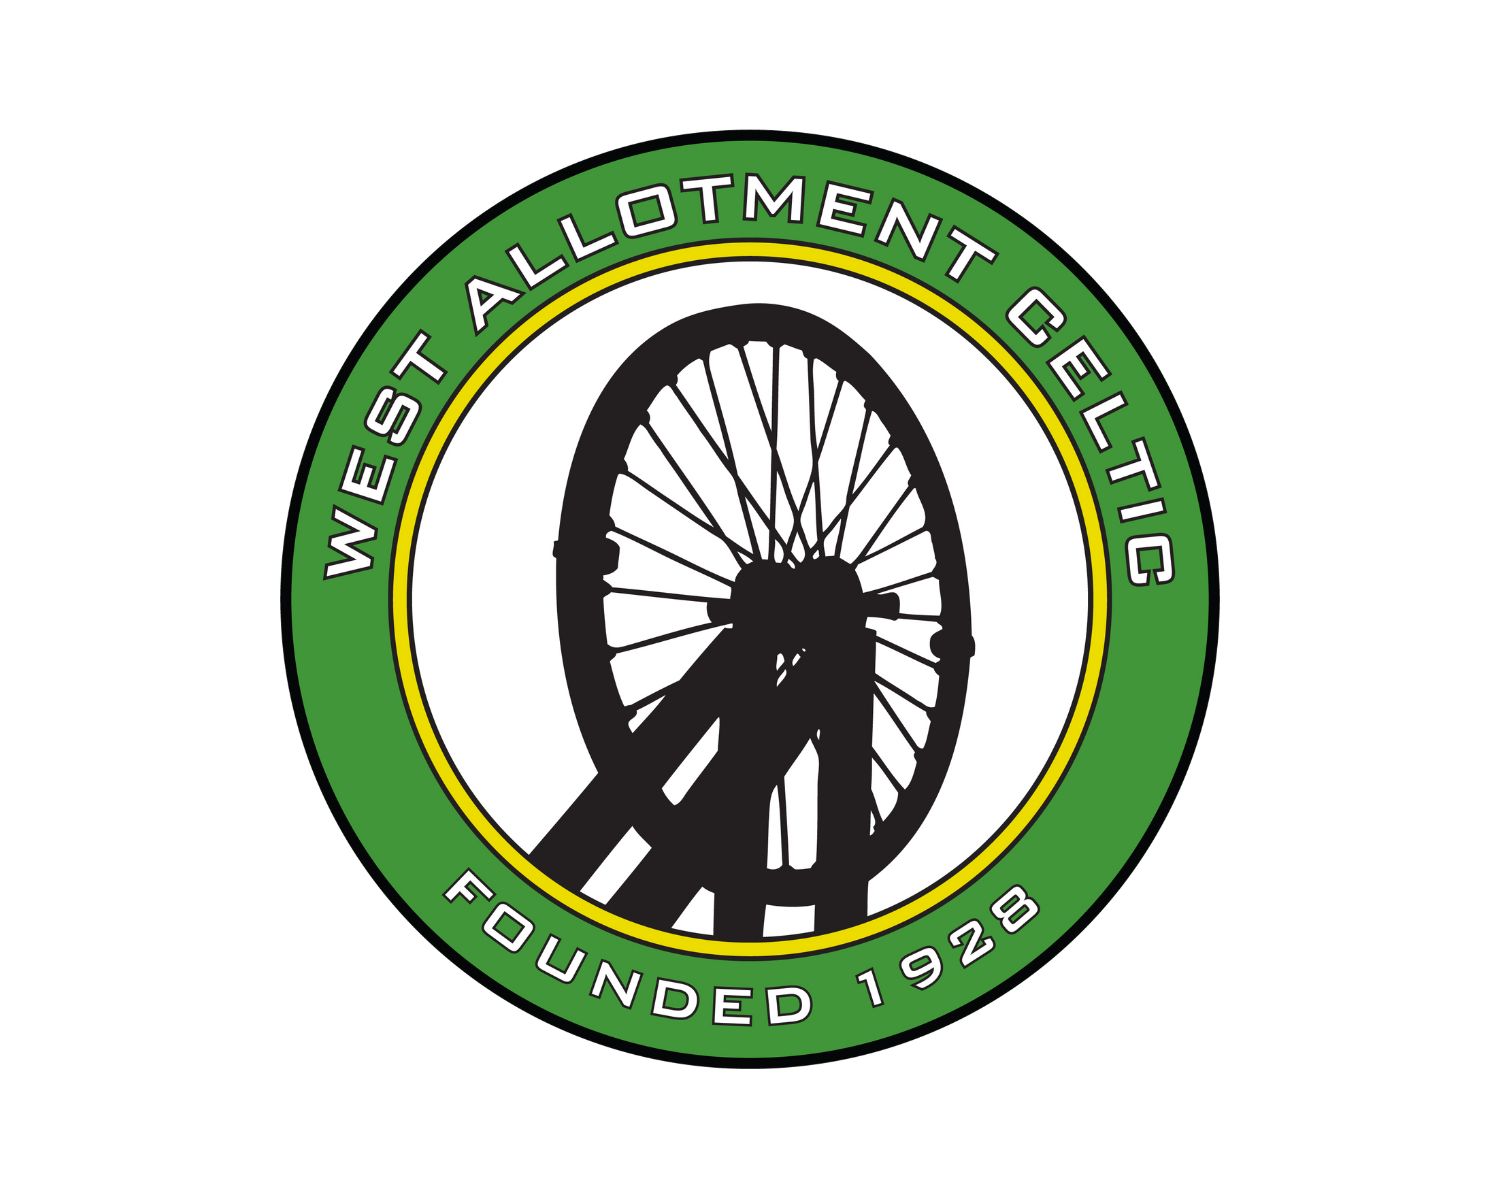 west-allotment-celtic-fc-13-football-club-facts